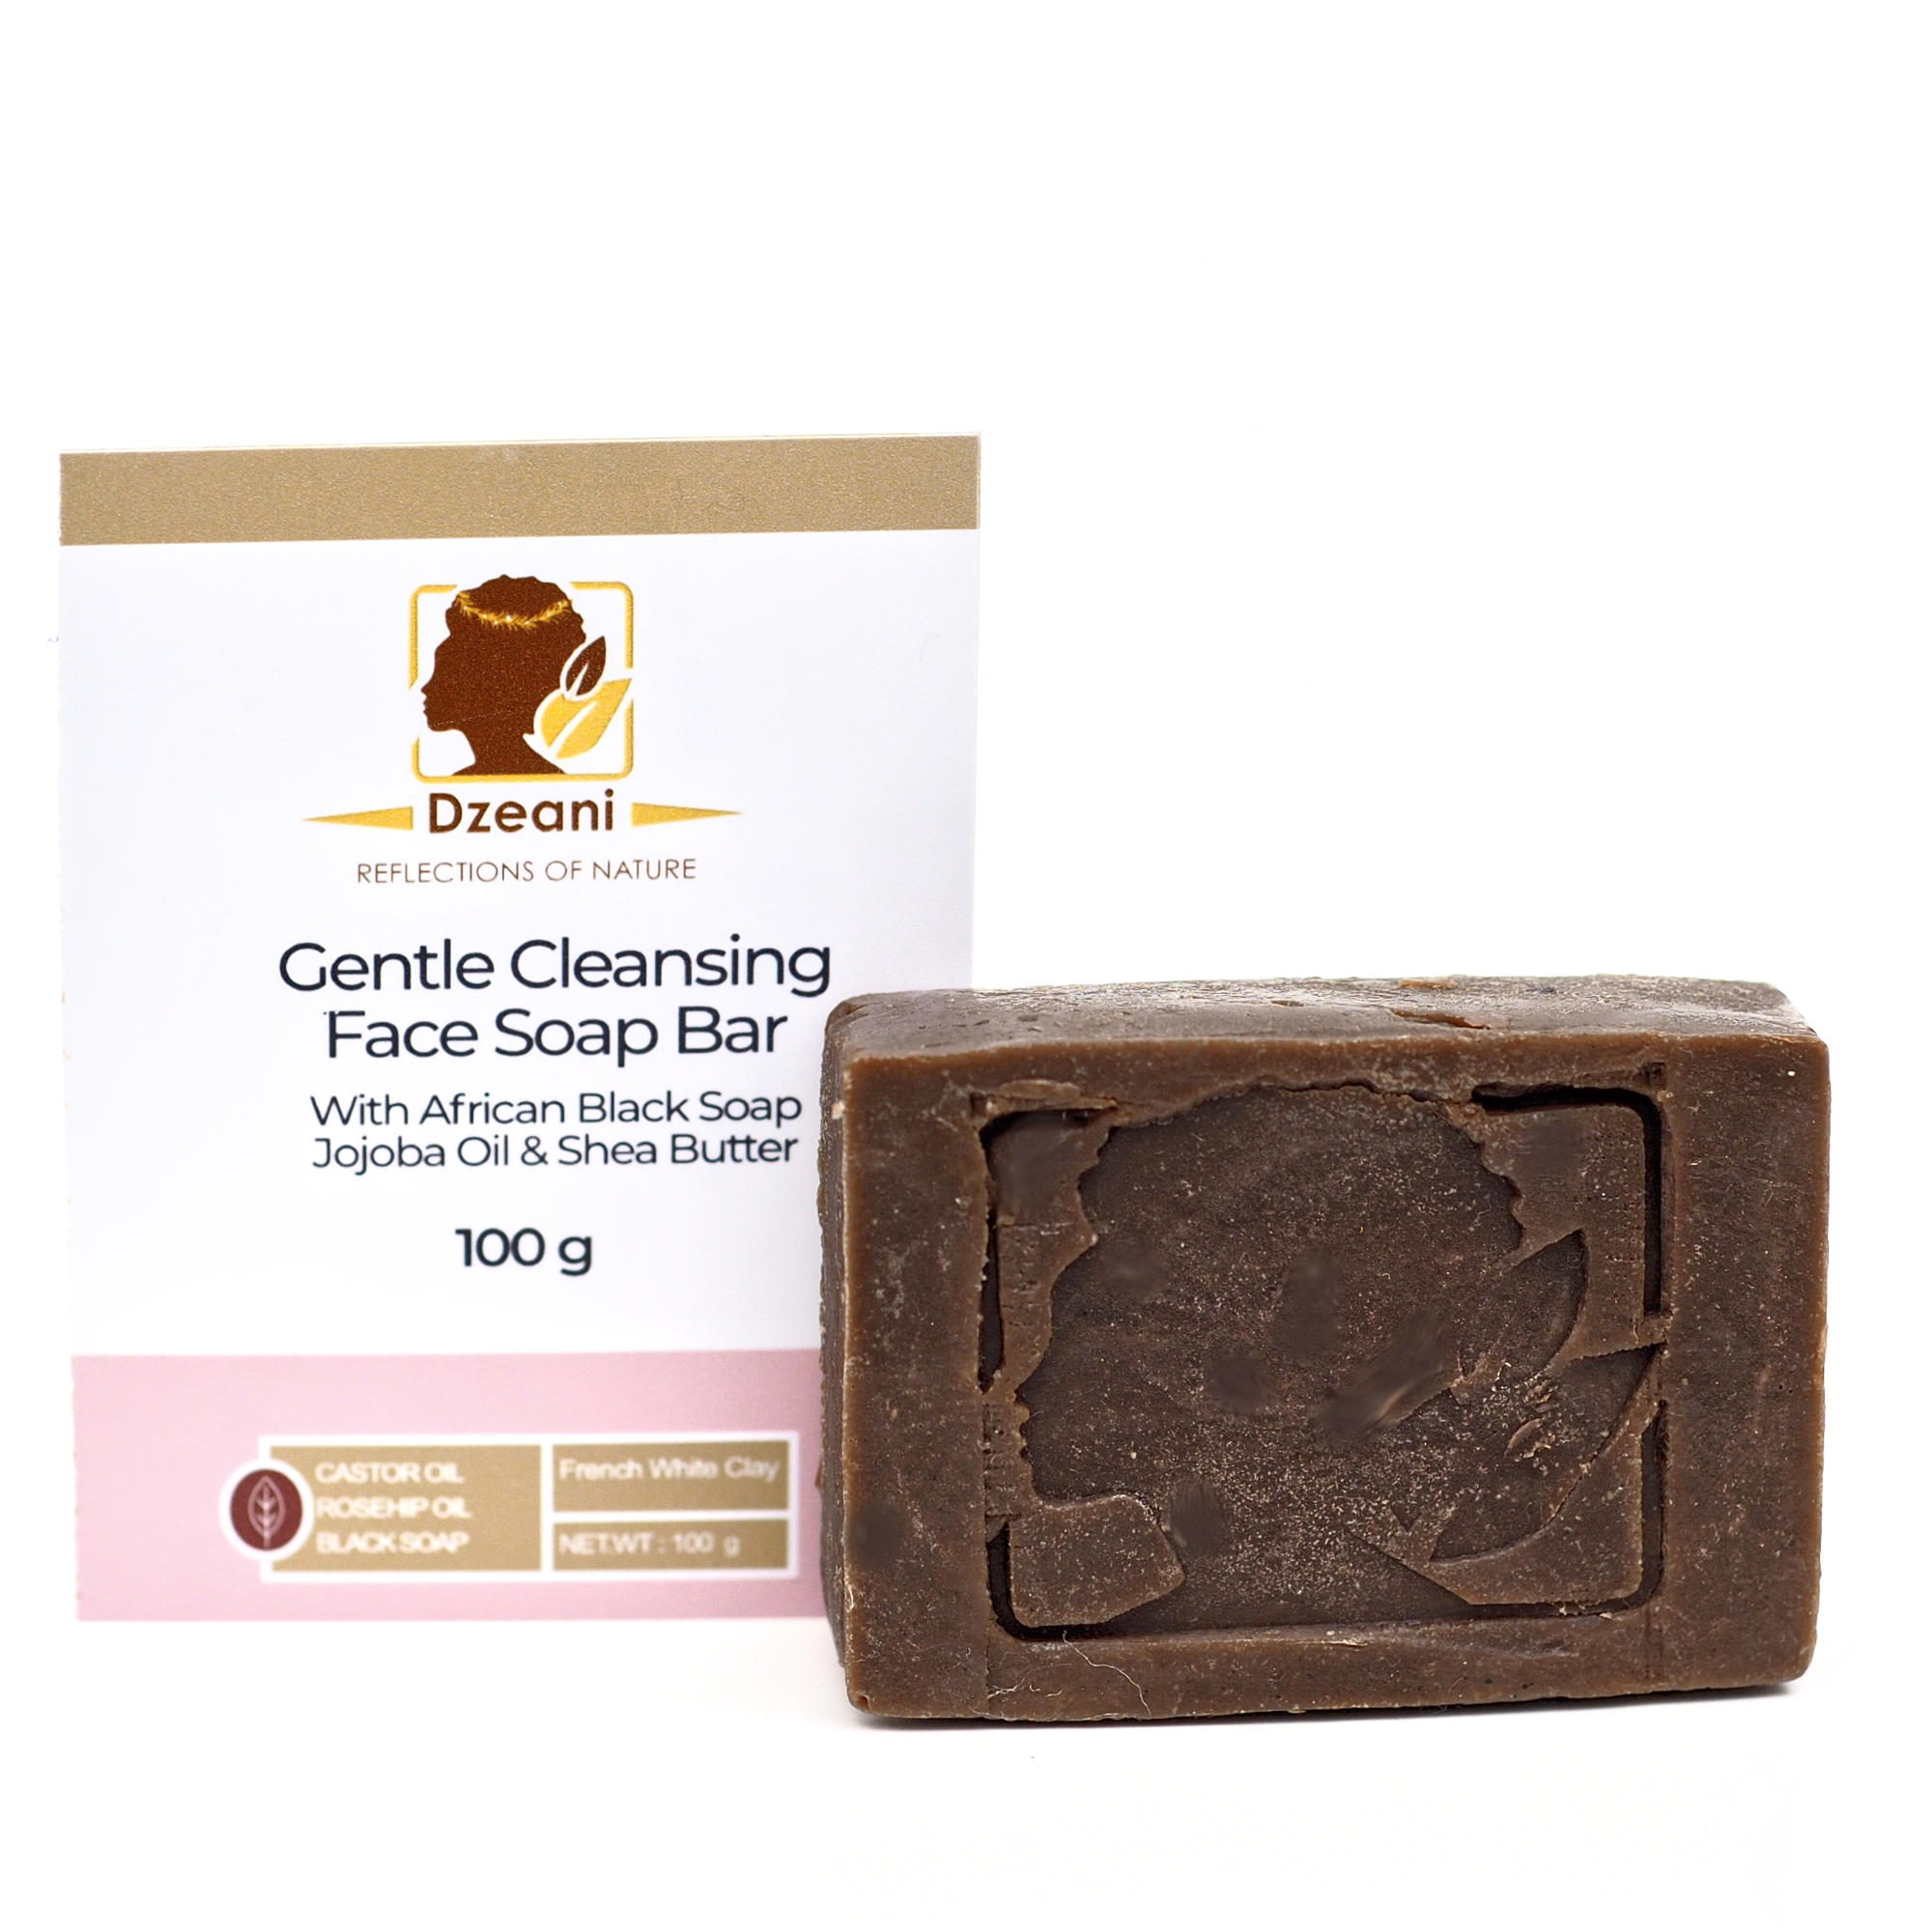 This hand-milled bar of soap from Dzeani have been formulated with moisturising ingredients that work to gently cleanse the skin, removing dirt and impurities